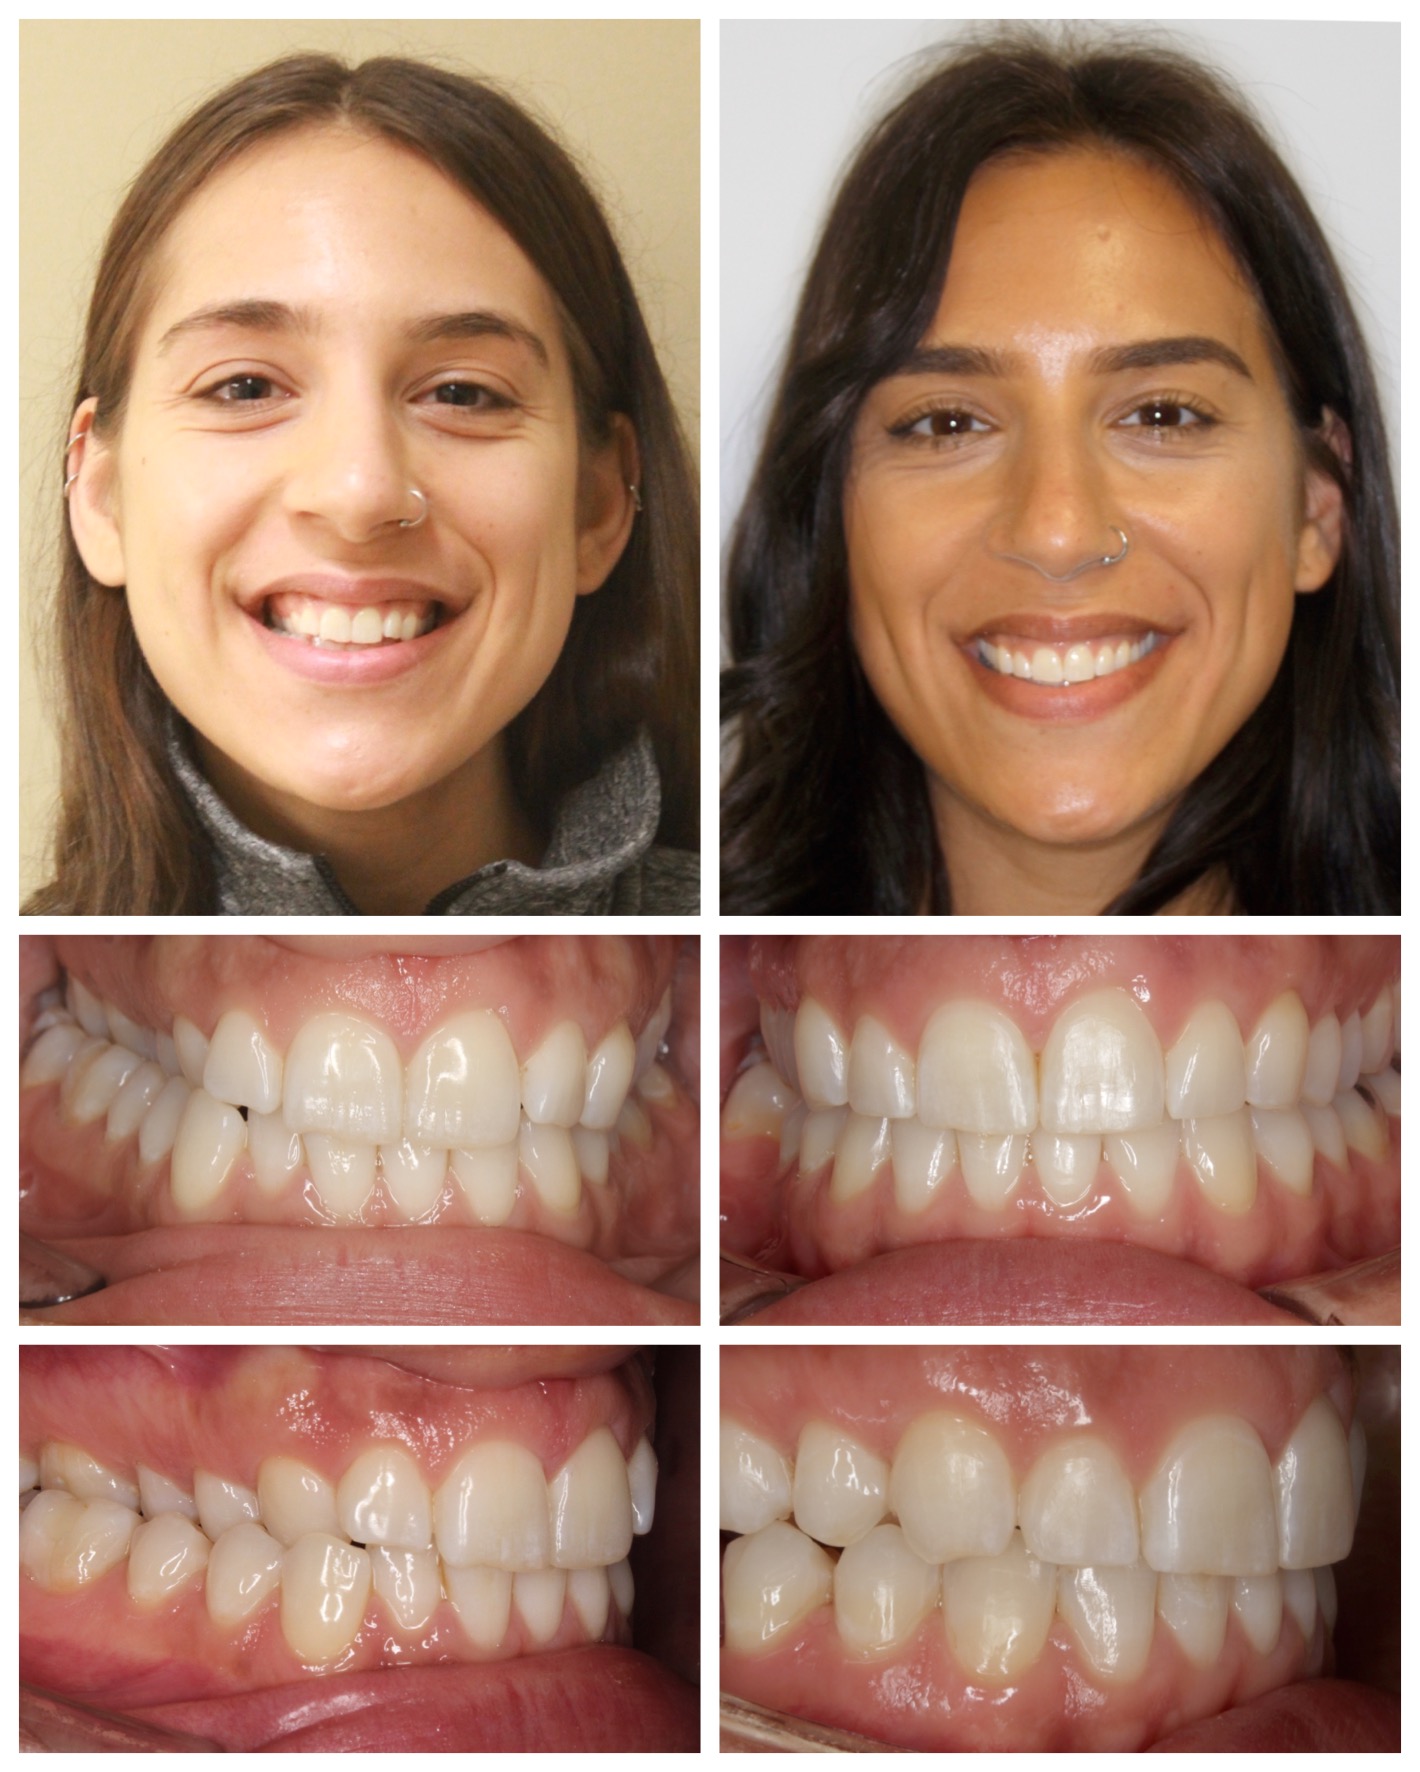 before-and-after braces by dobie revolution orthodontist - hamden and guilford, CT